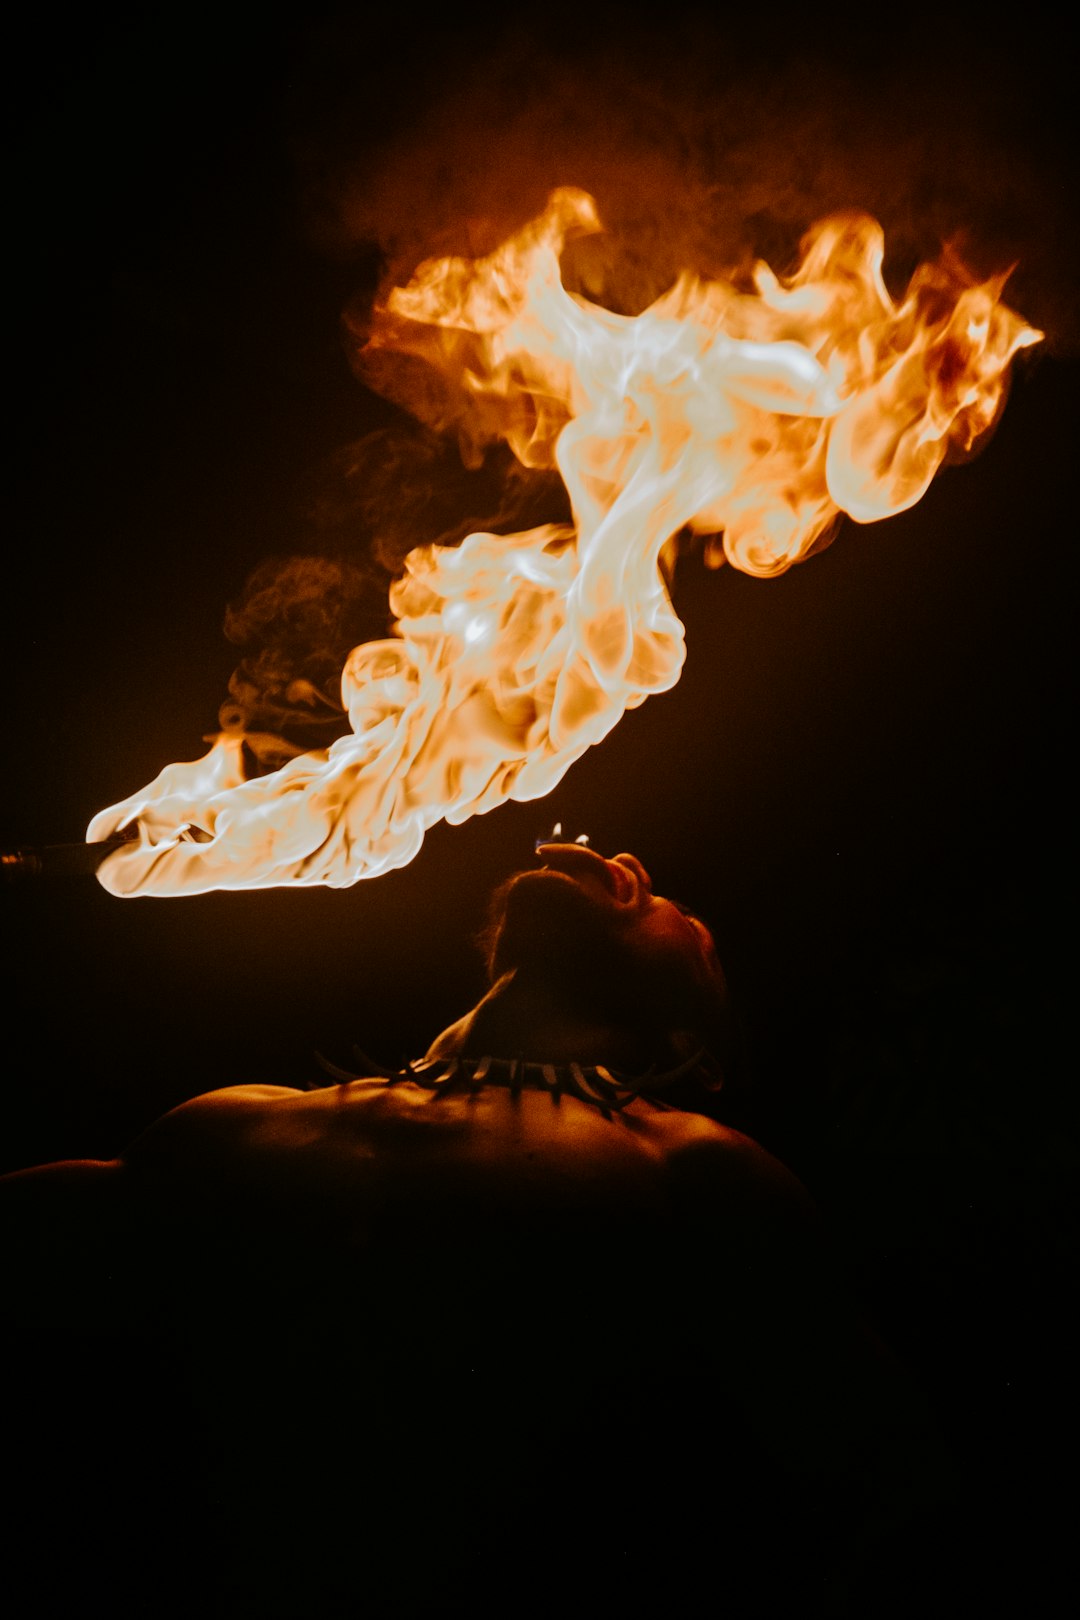 Taste of Fire! - this photo was captured during an amazing fire dance, part of the Fia Fia night at the Tradition Resort in Apia, Samoa